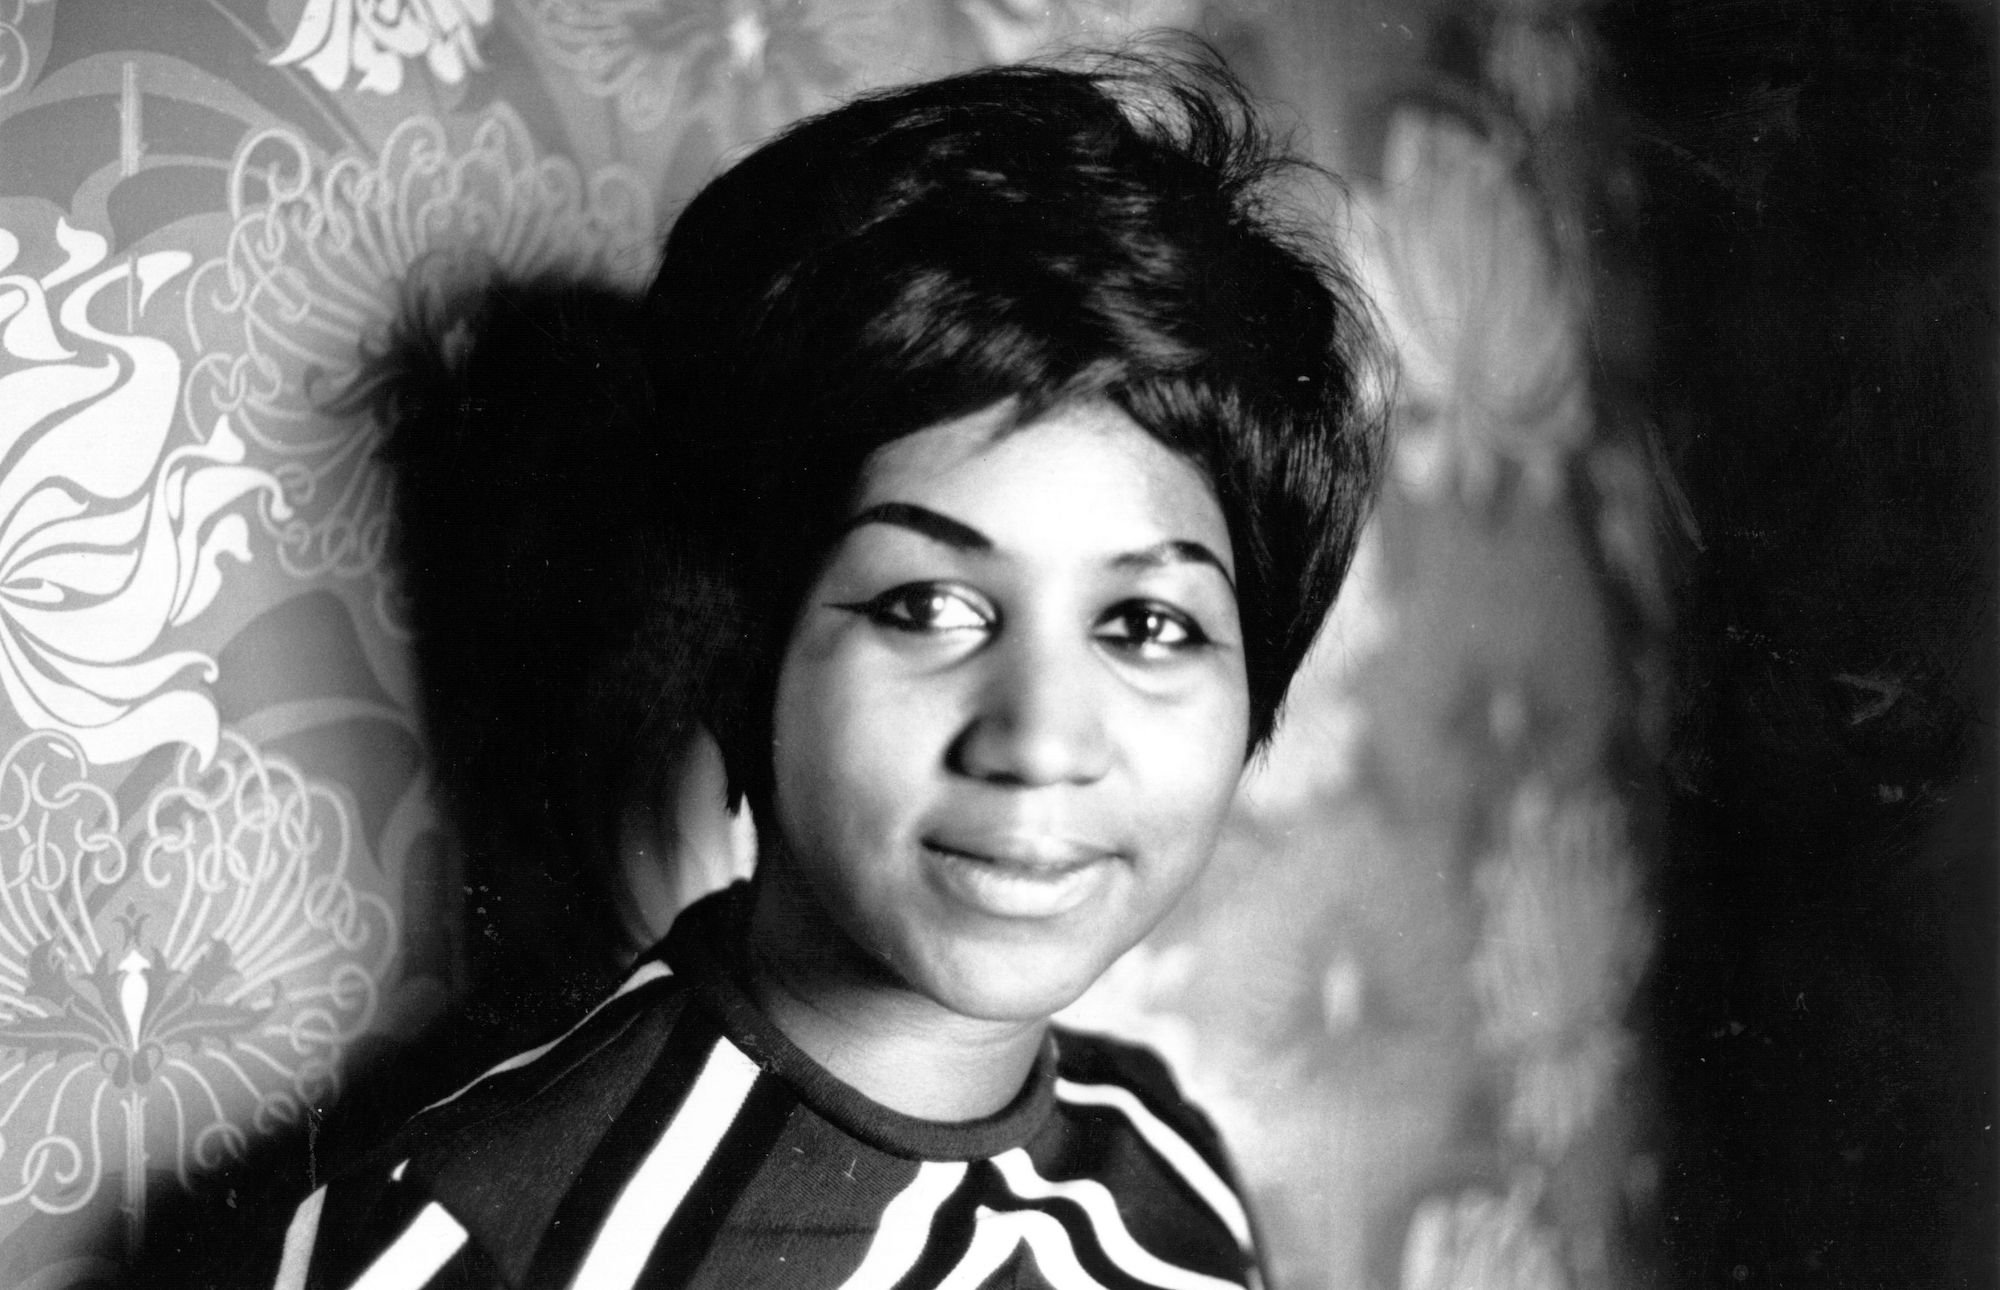 Aretha Franklin smiling, in black and white